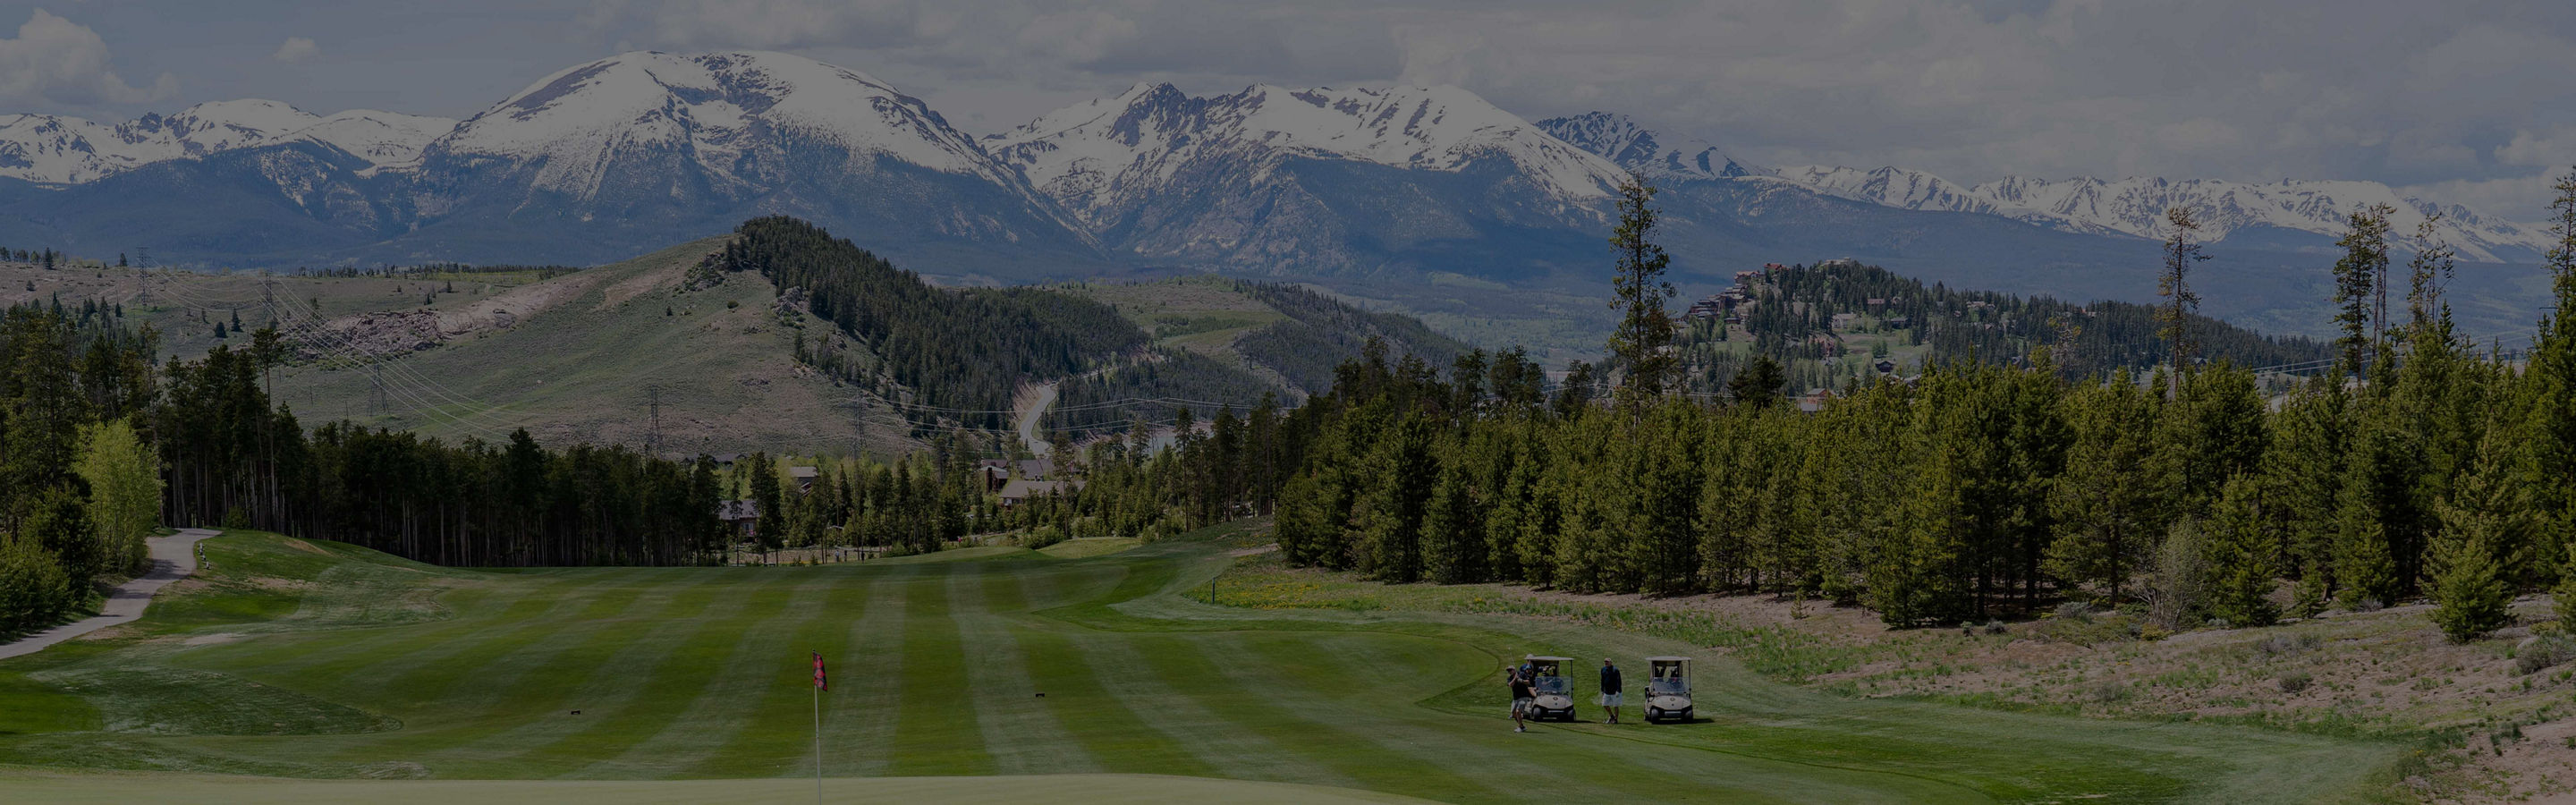 The back 9 on the River Course in Keystone, CO.